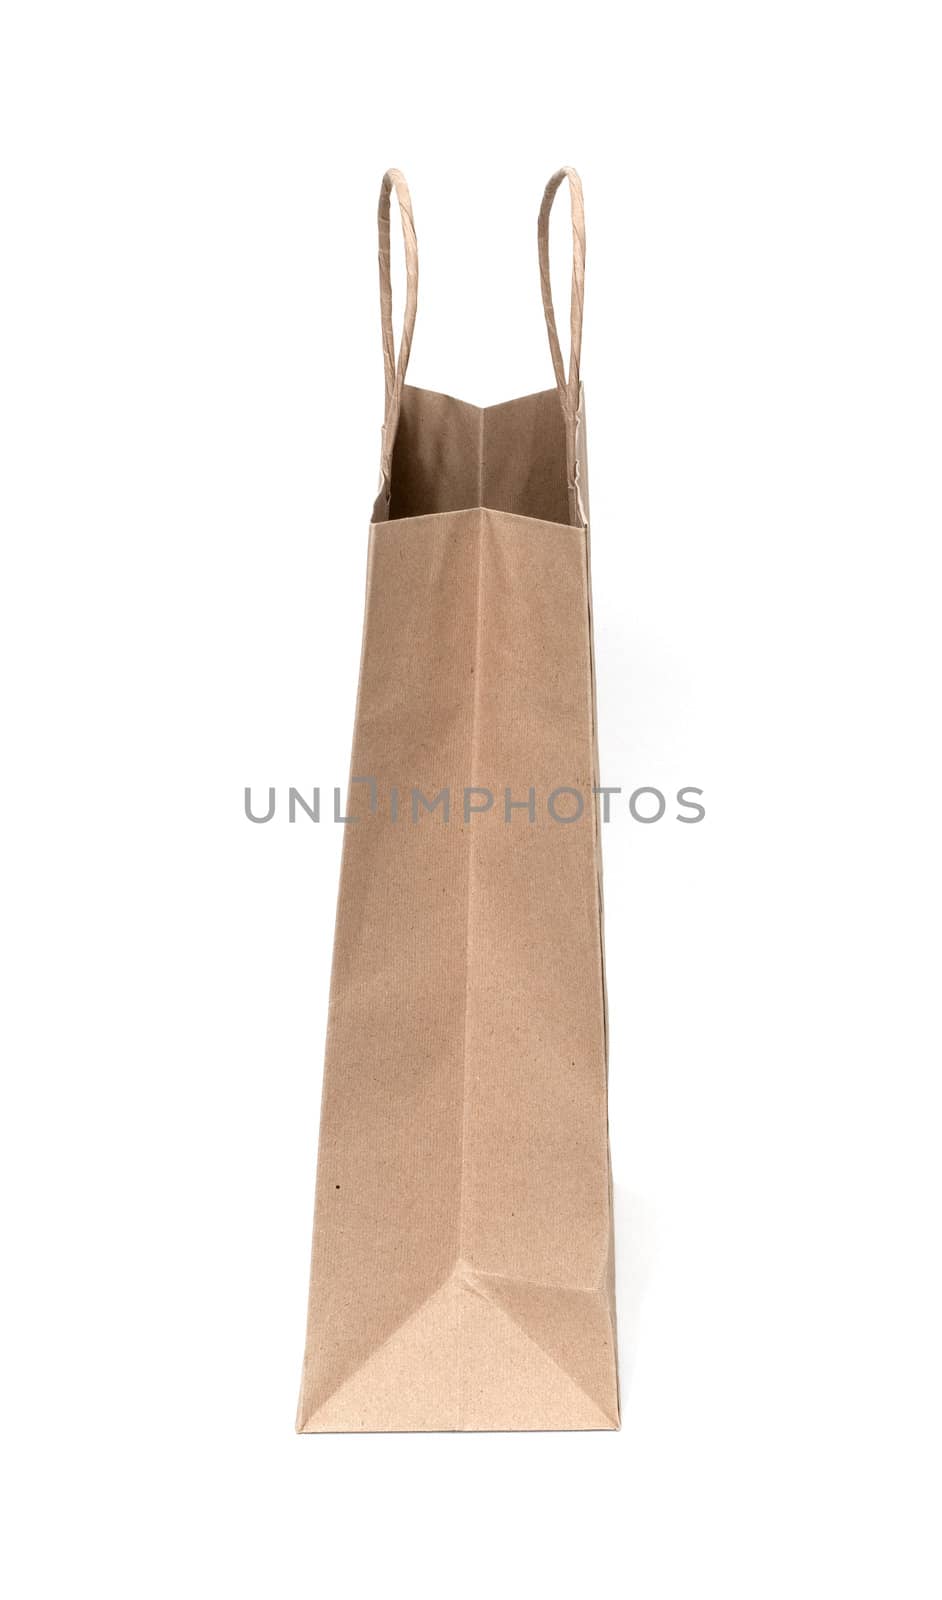 Recyclable paper bag by DNKSTUDIO